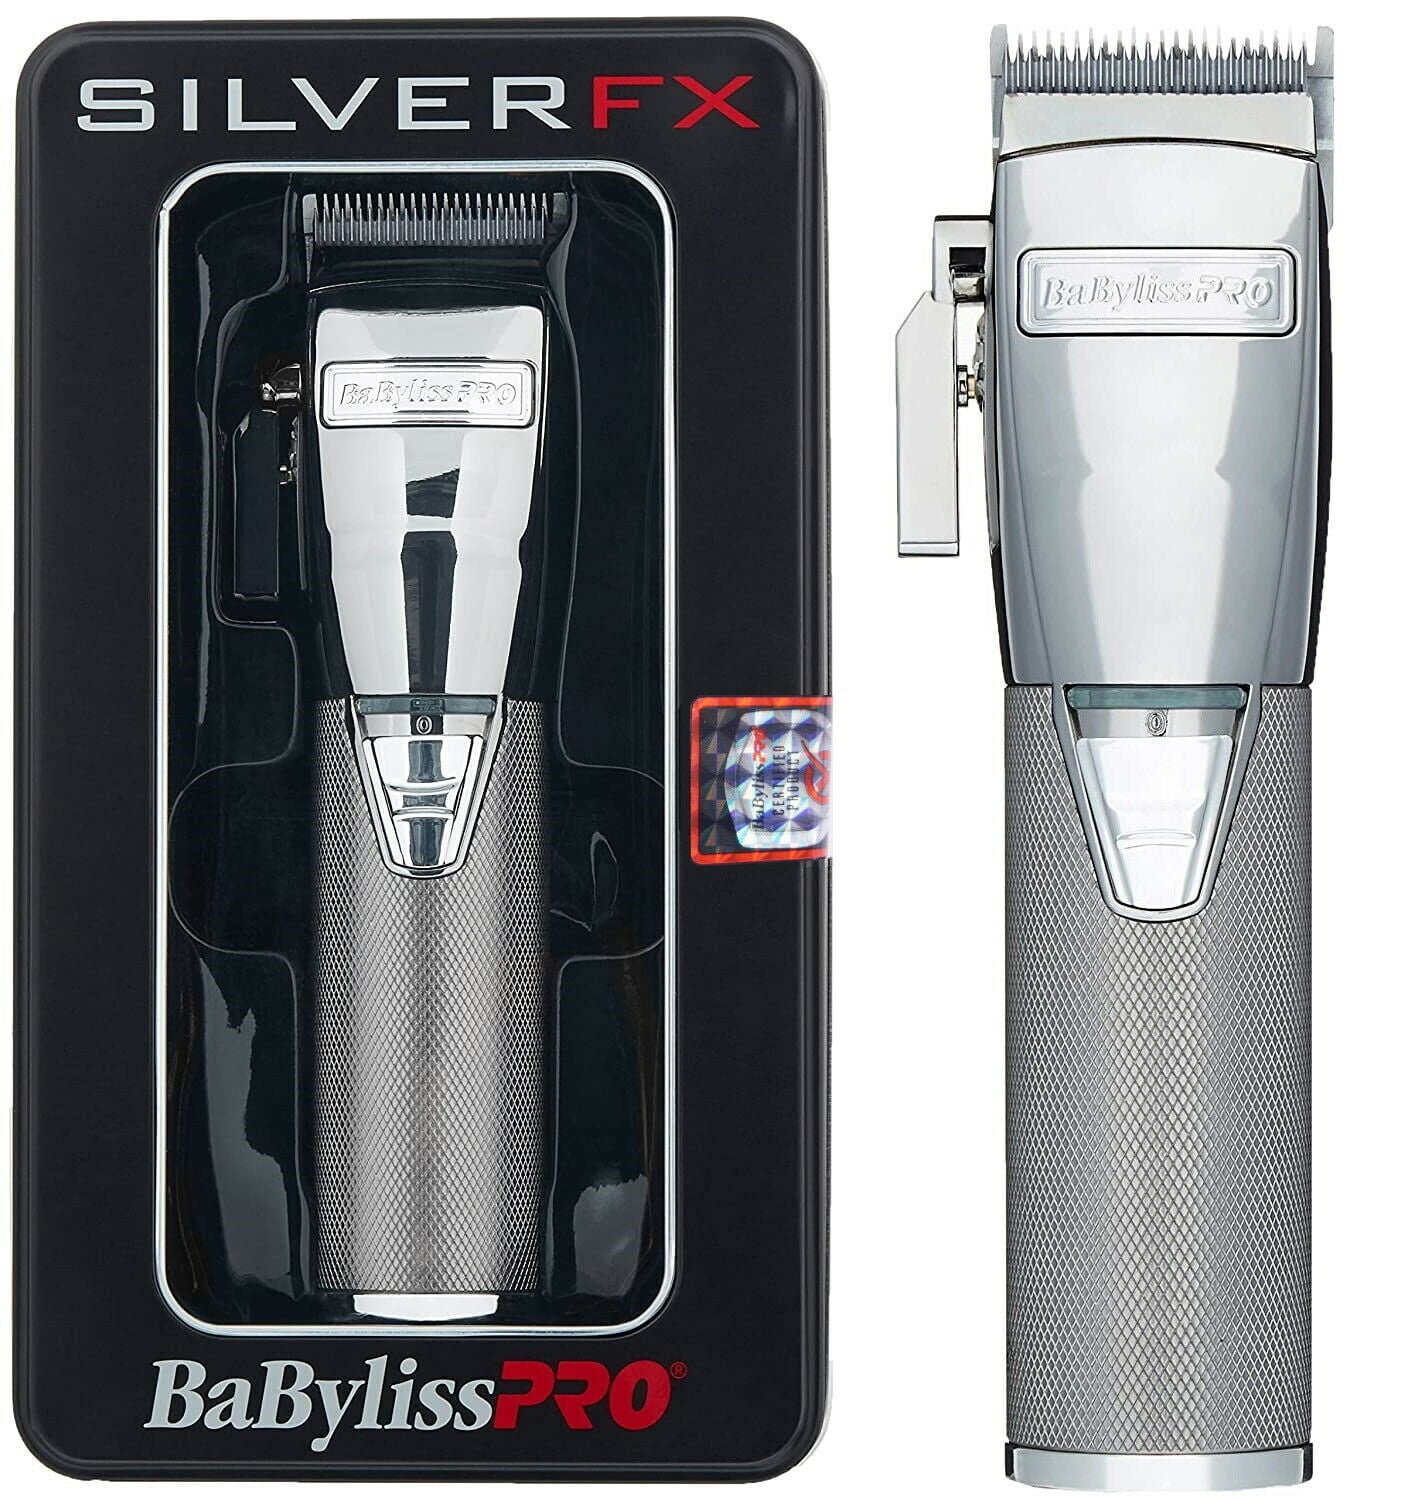 Babyliss Pro SILVER FX FX870S All Metal Cord/Cordless Professional Clippers Walmart.com